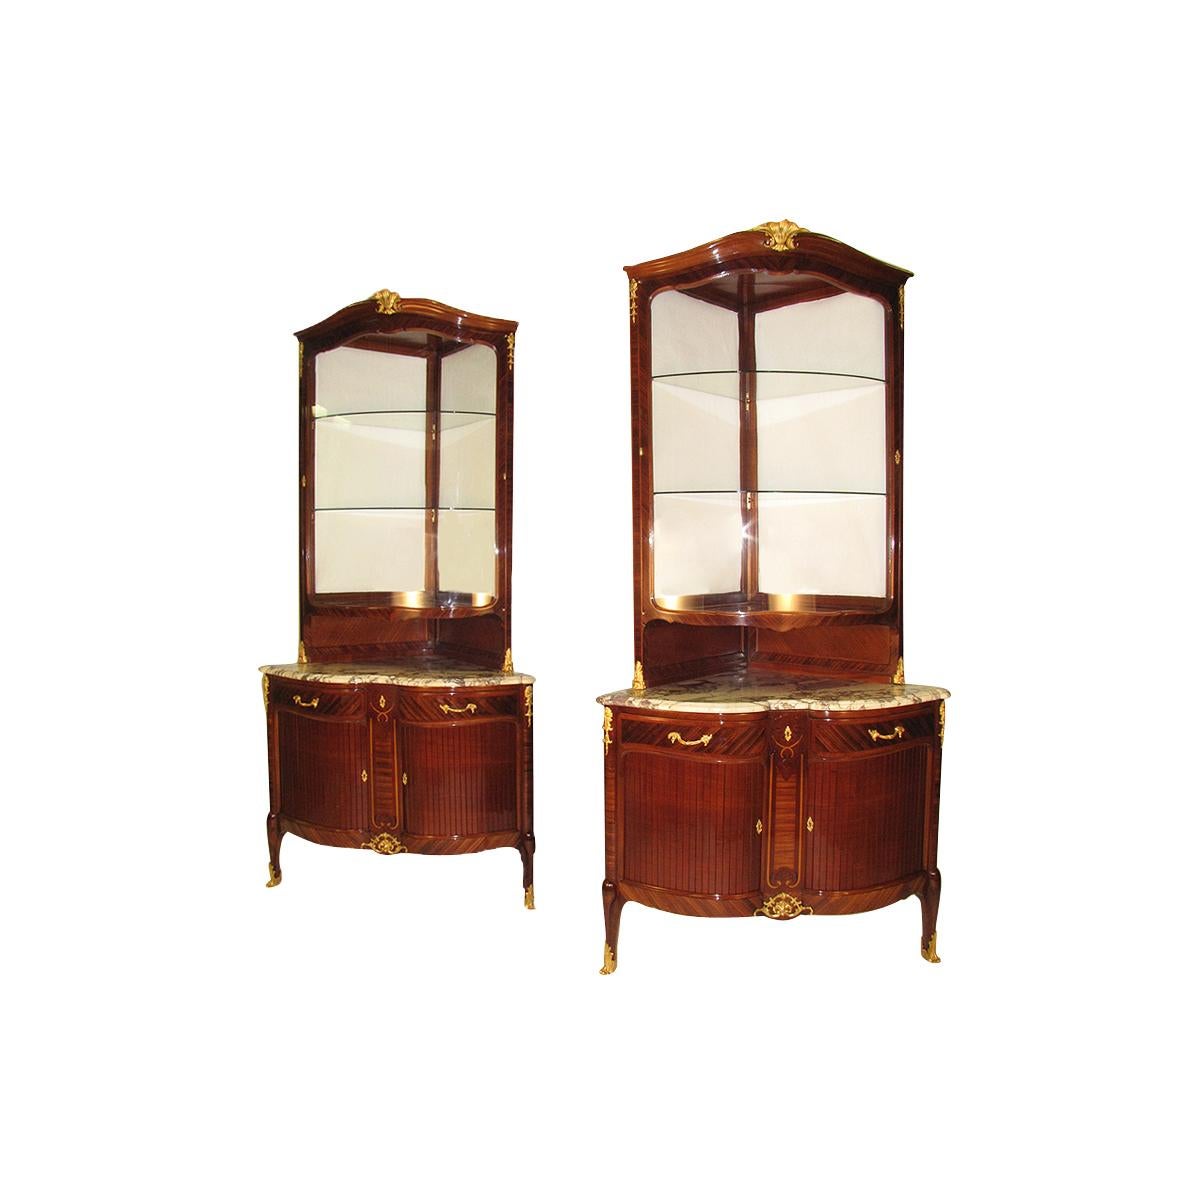 Pair of French 19th Century Louis XV Style Gilt Bronze-Mounted Corner Vitrines For Sale 6